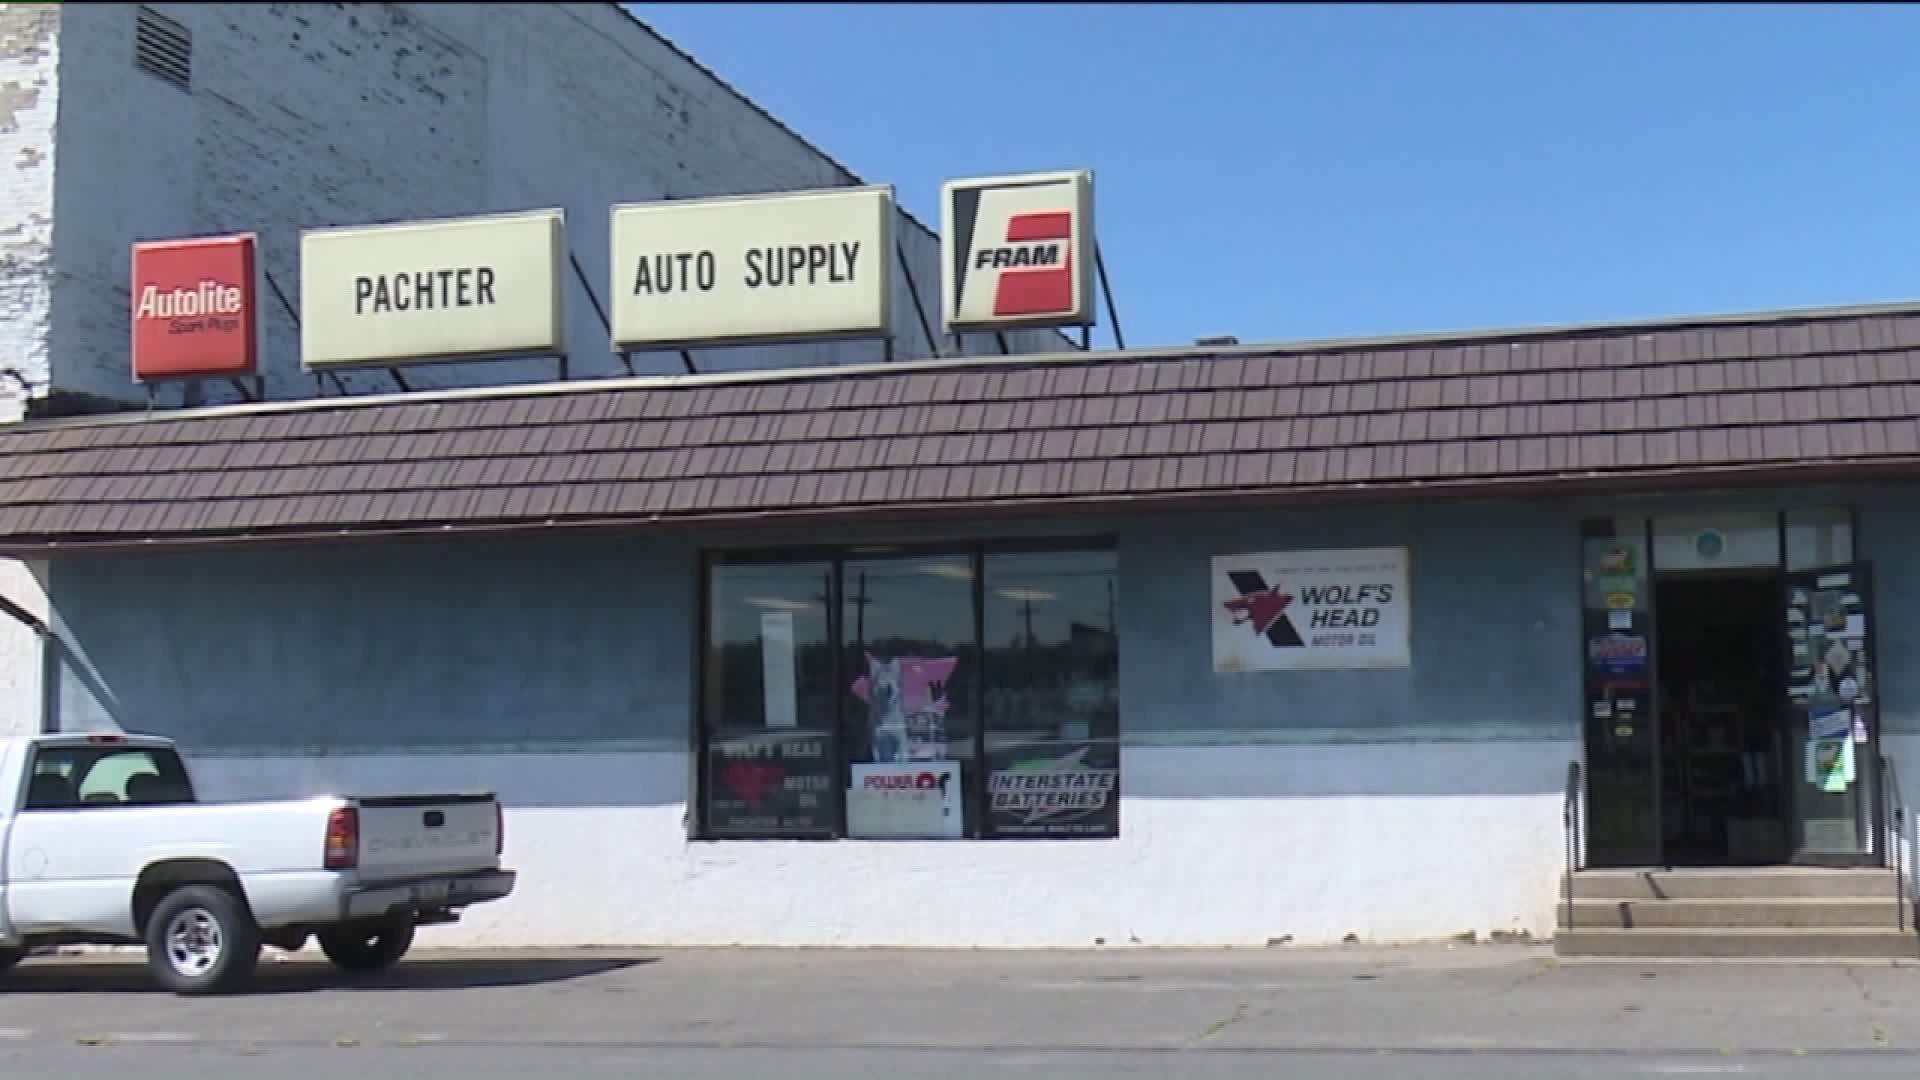 Auto Supply Business to Close after 60 Years